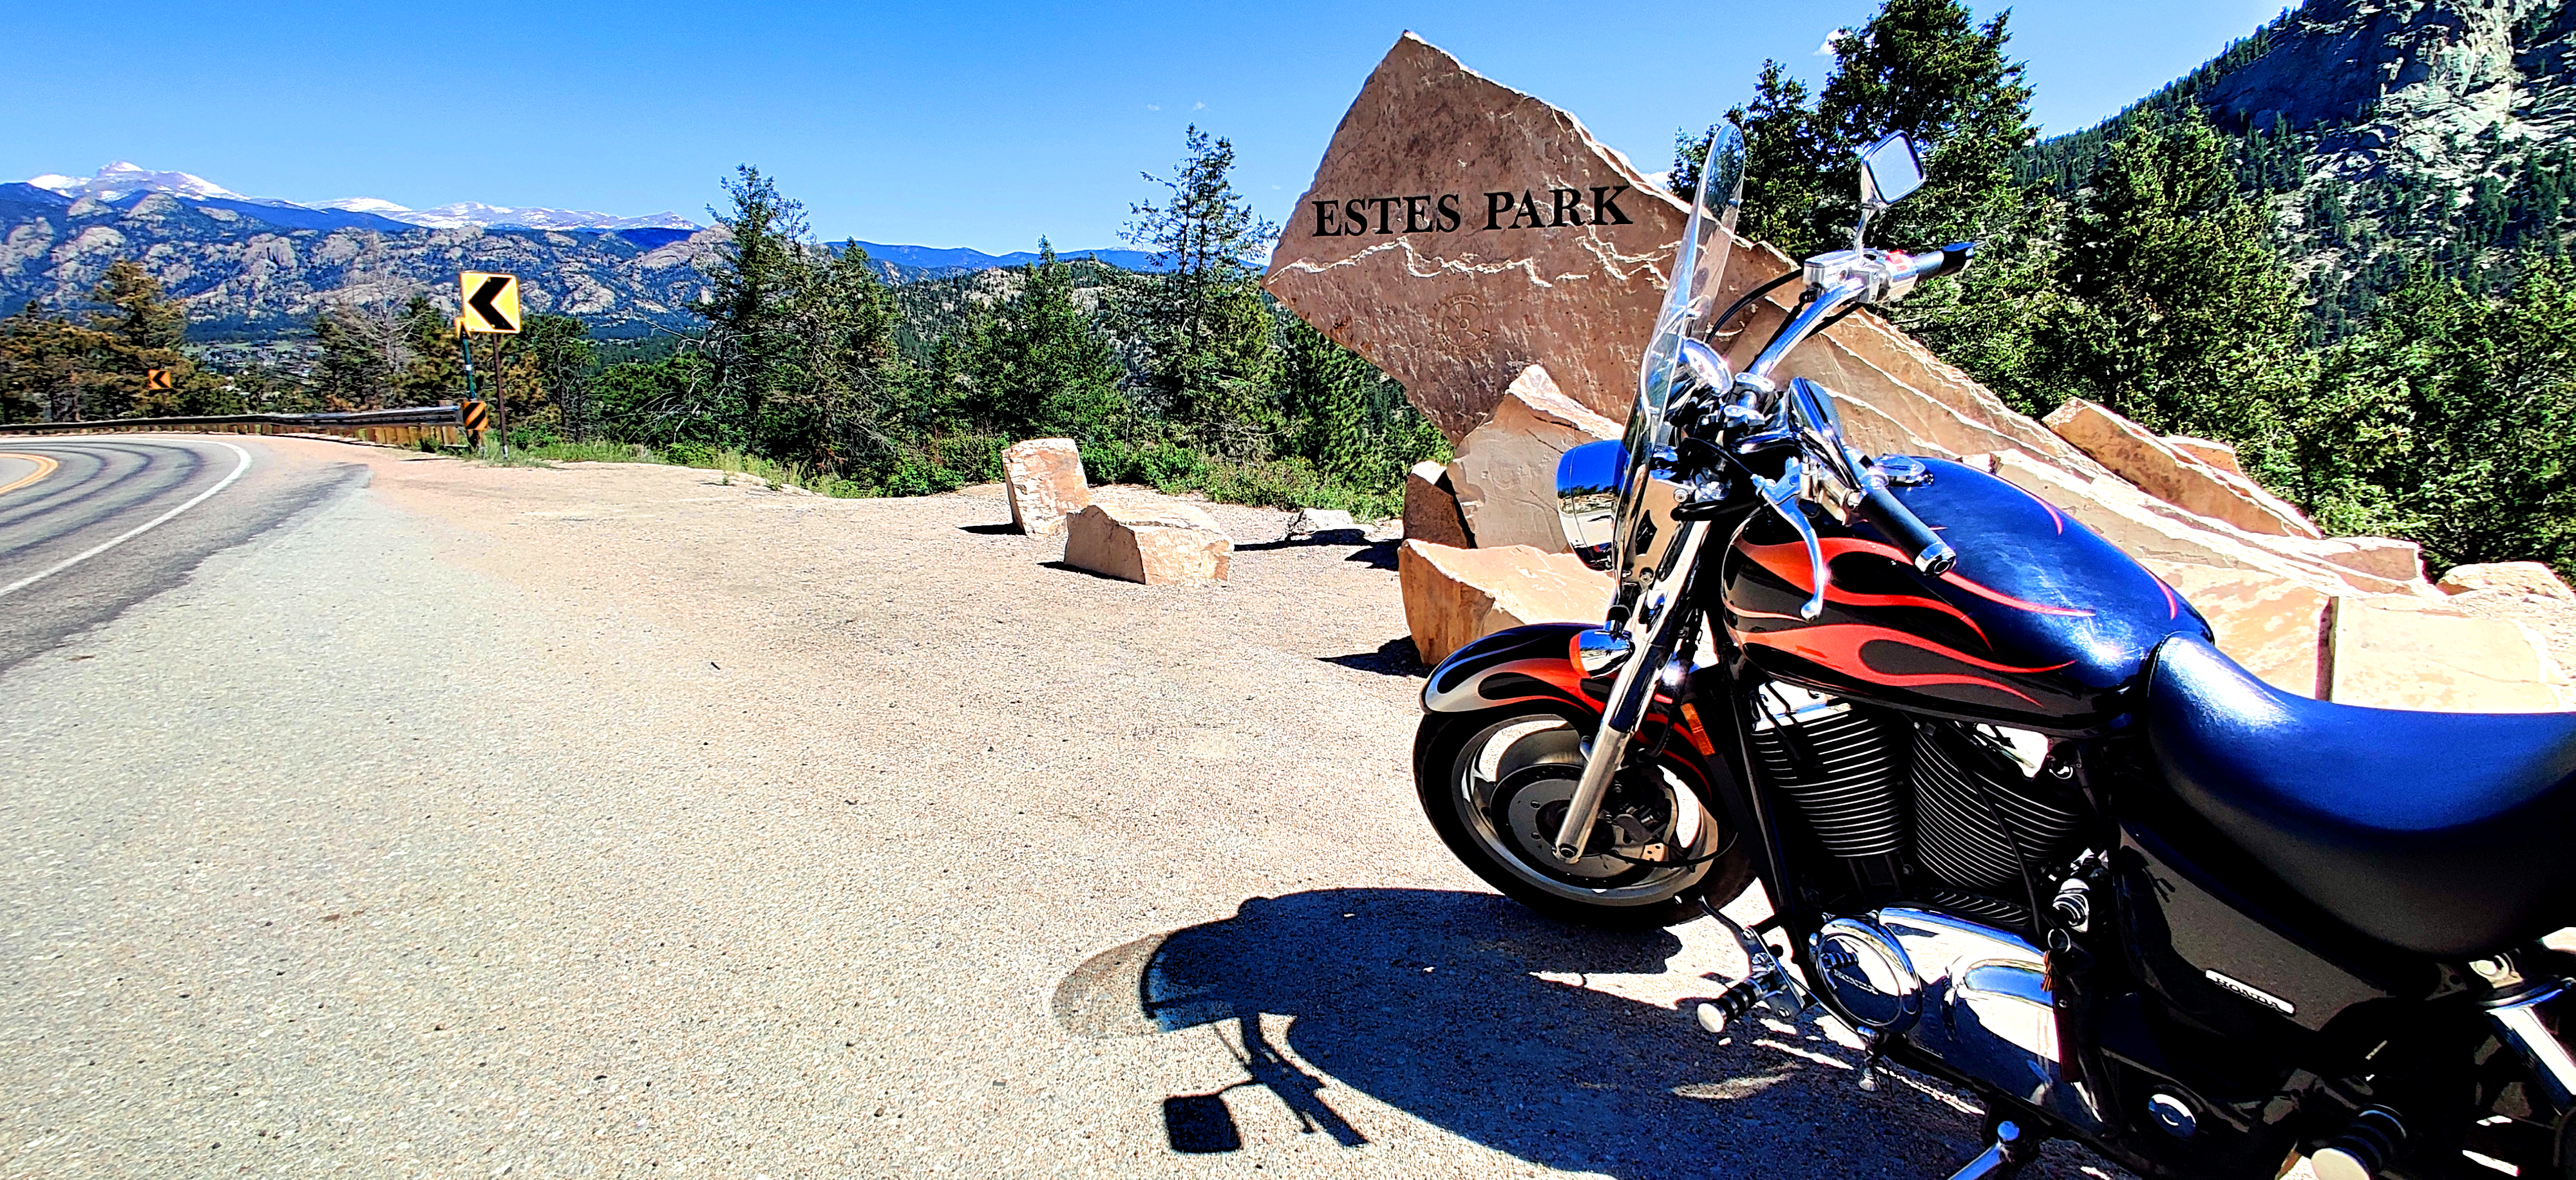 A black Honda Shadow 1100 motorcycle with flames in front of Estes Park